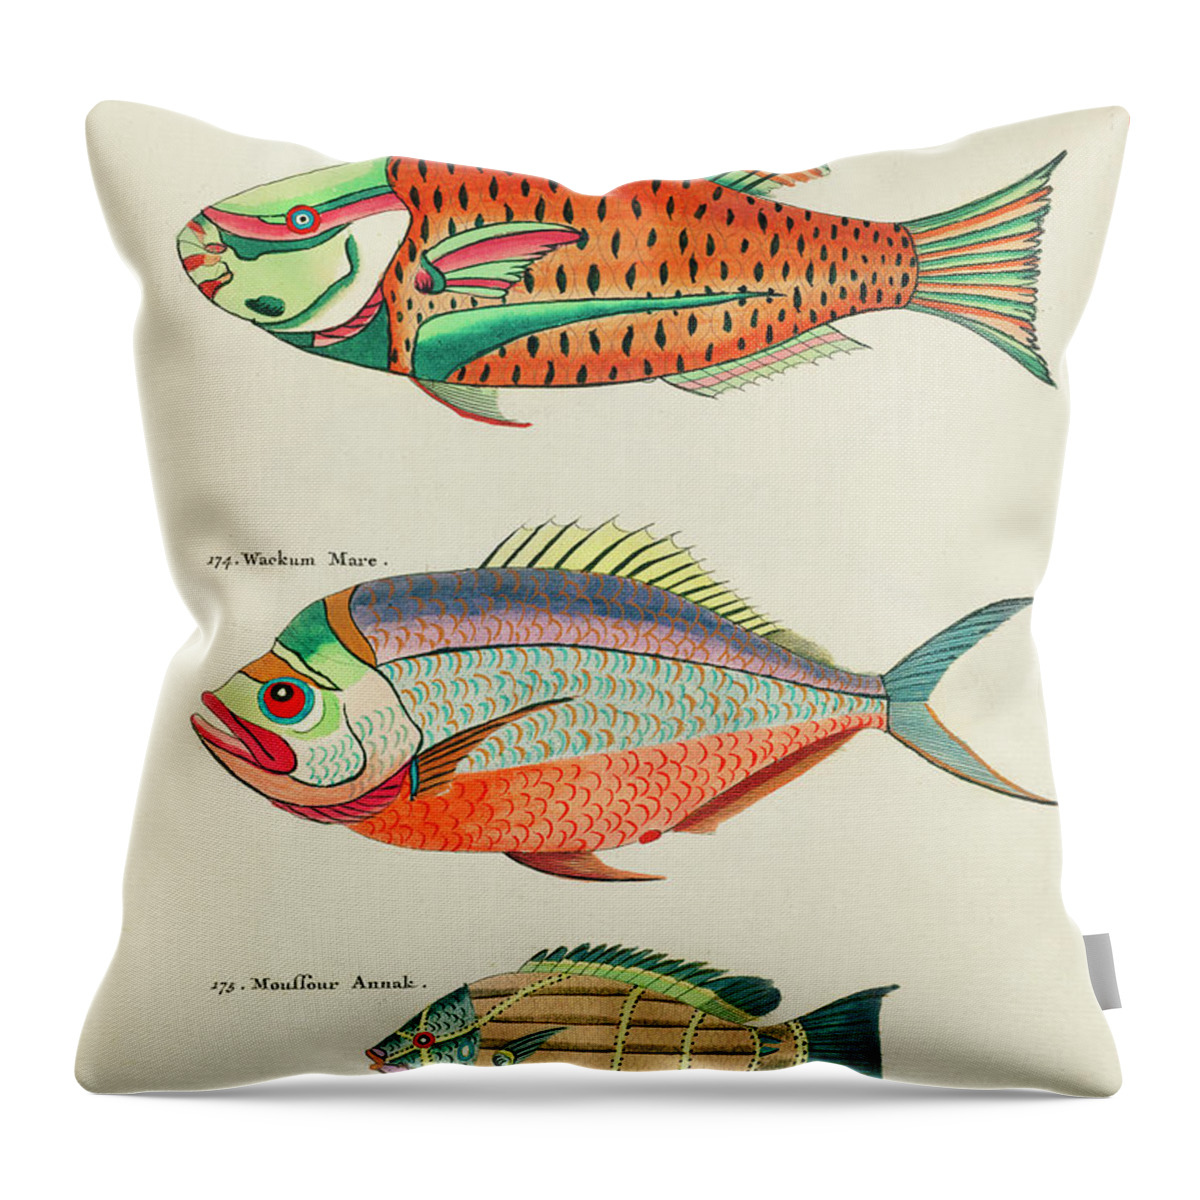 Fish Throw Pillow featuring the digital art Vintage, Whimsical Fish and Marine Life Illustration by Louis Renard - Poisson Peroquet, Wackum Mare by Louis Renard